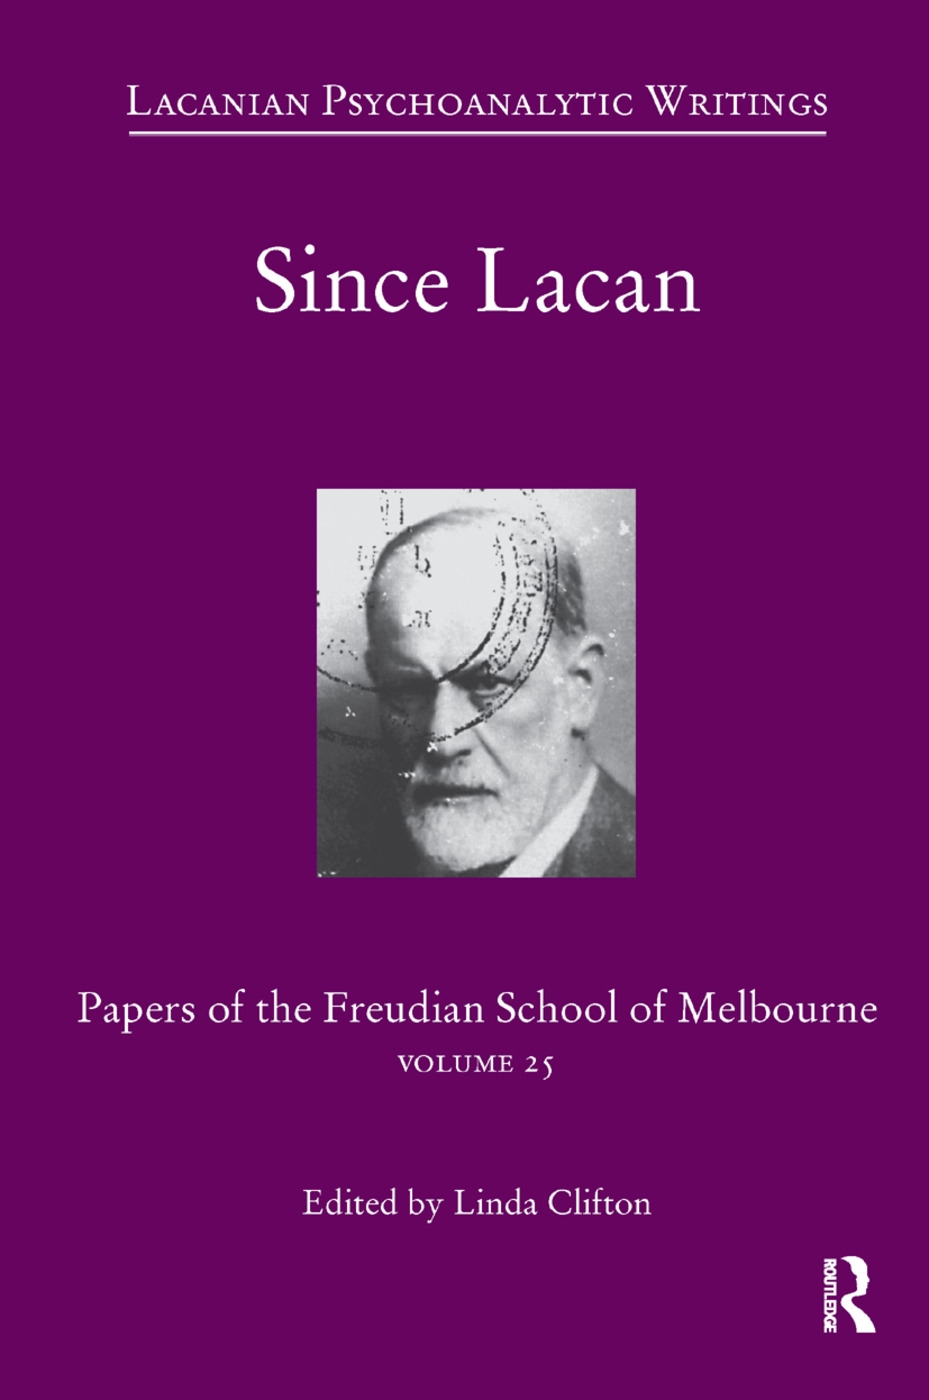 Since Lacan: Papers of the Freudian School of Melbourne